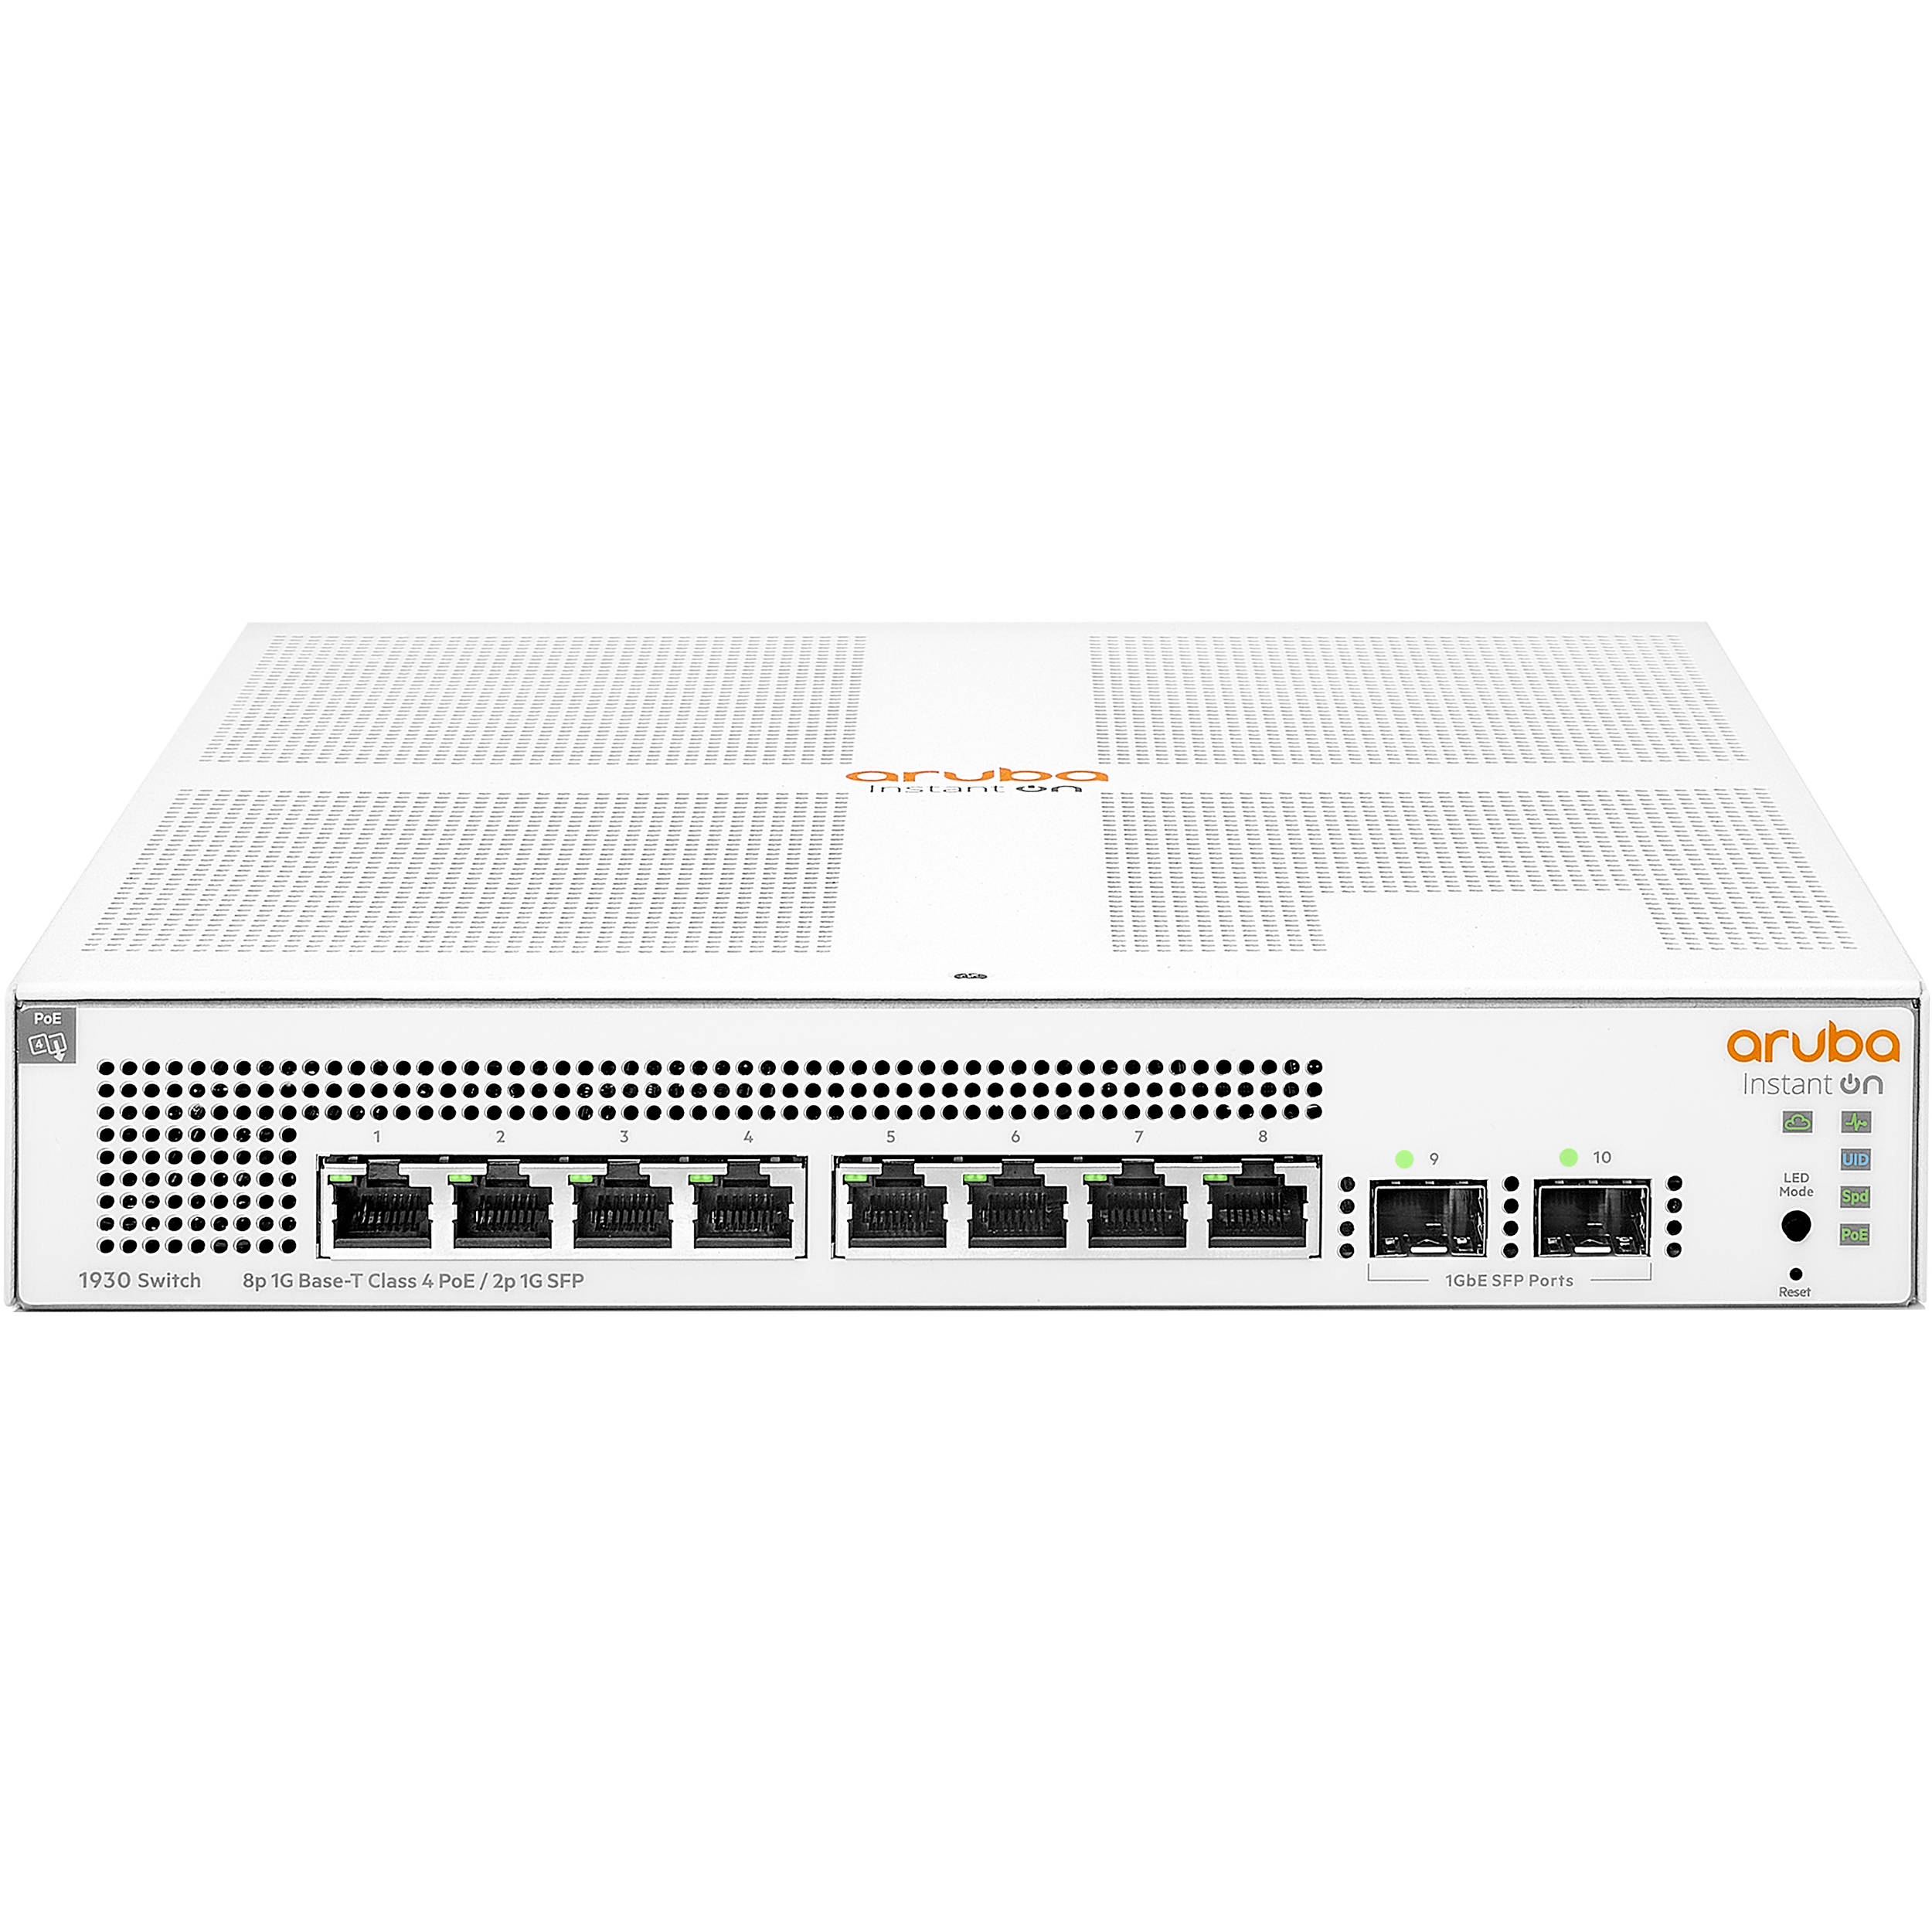 JL681A | 8-Port Gigabit PoE+ Compliant Managed Switch with SFP